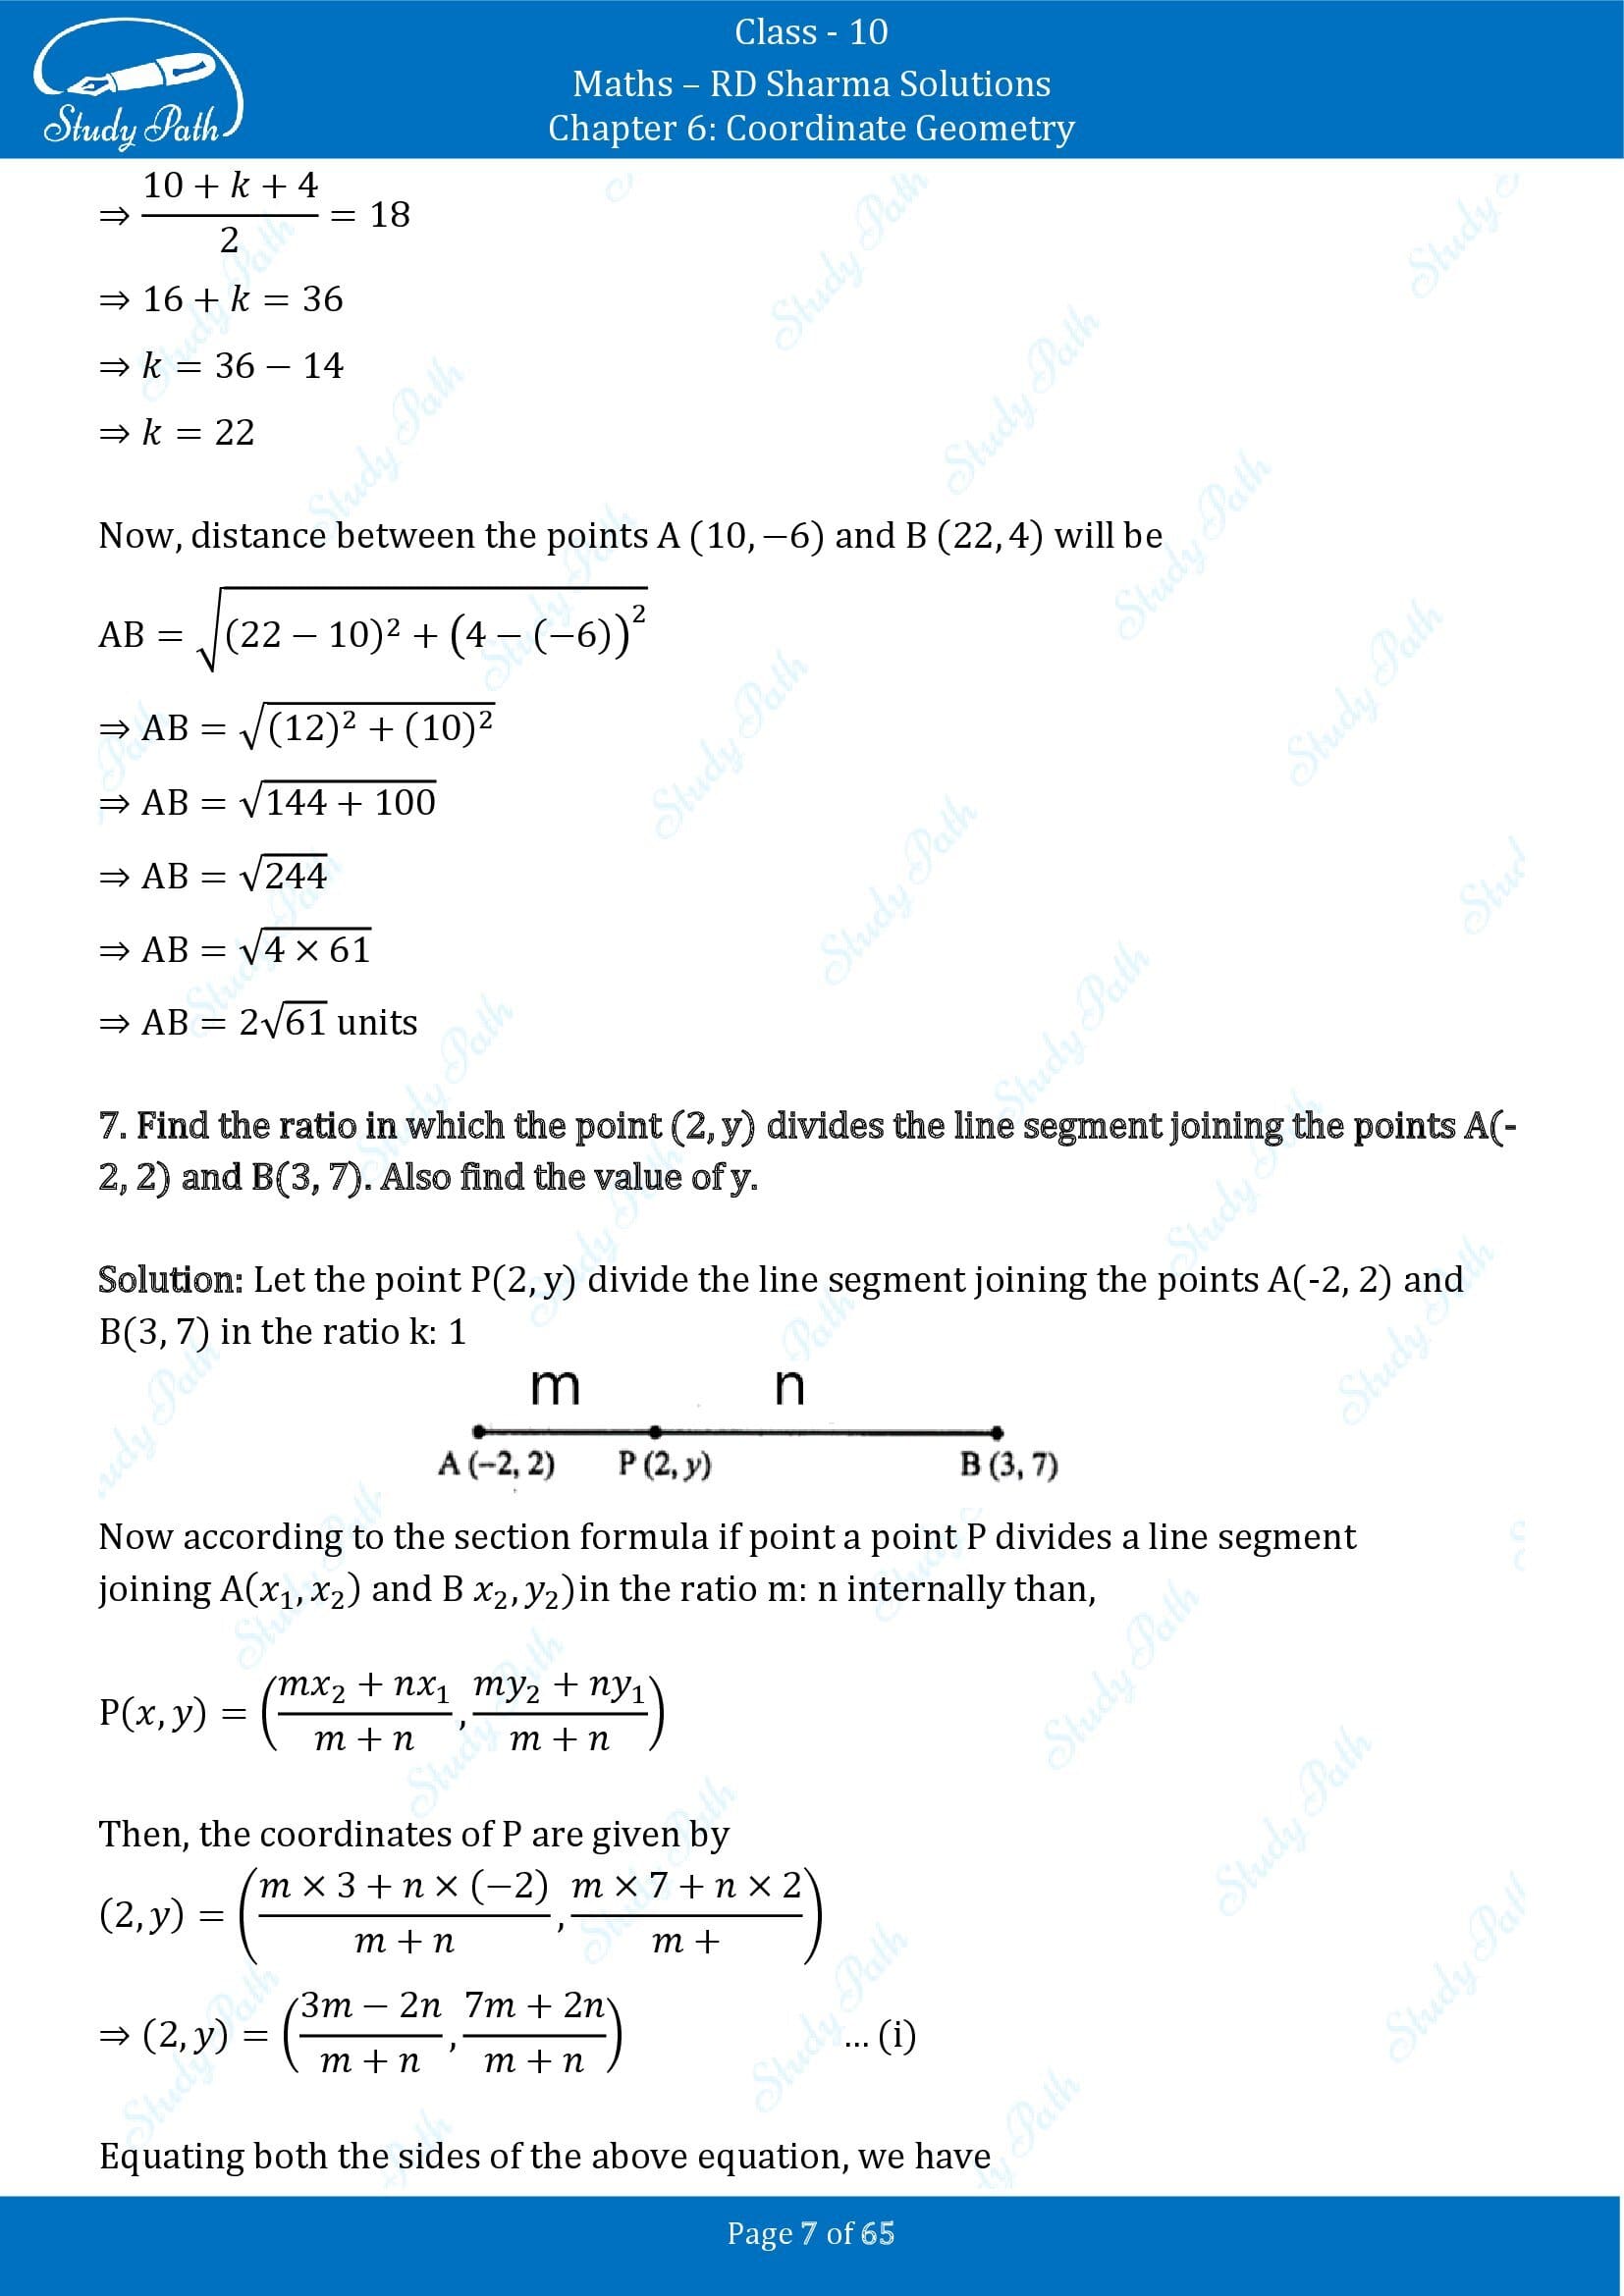 RD Sharma Solutions Class 10 Chapter 6 Coordinate Geometry Exercise 6.3 00007